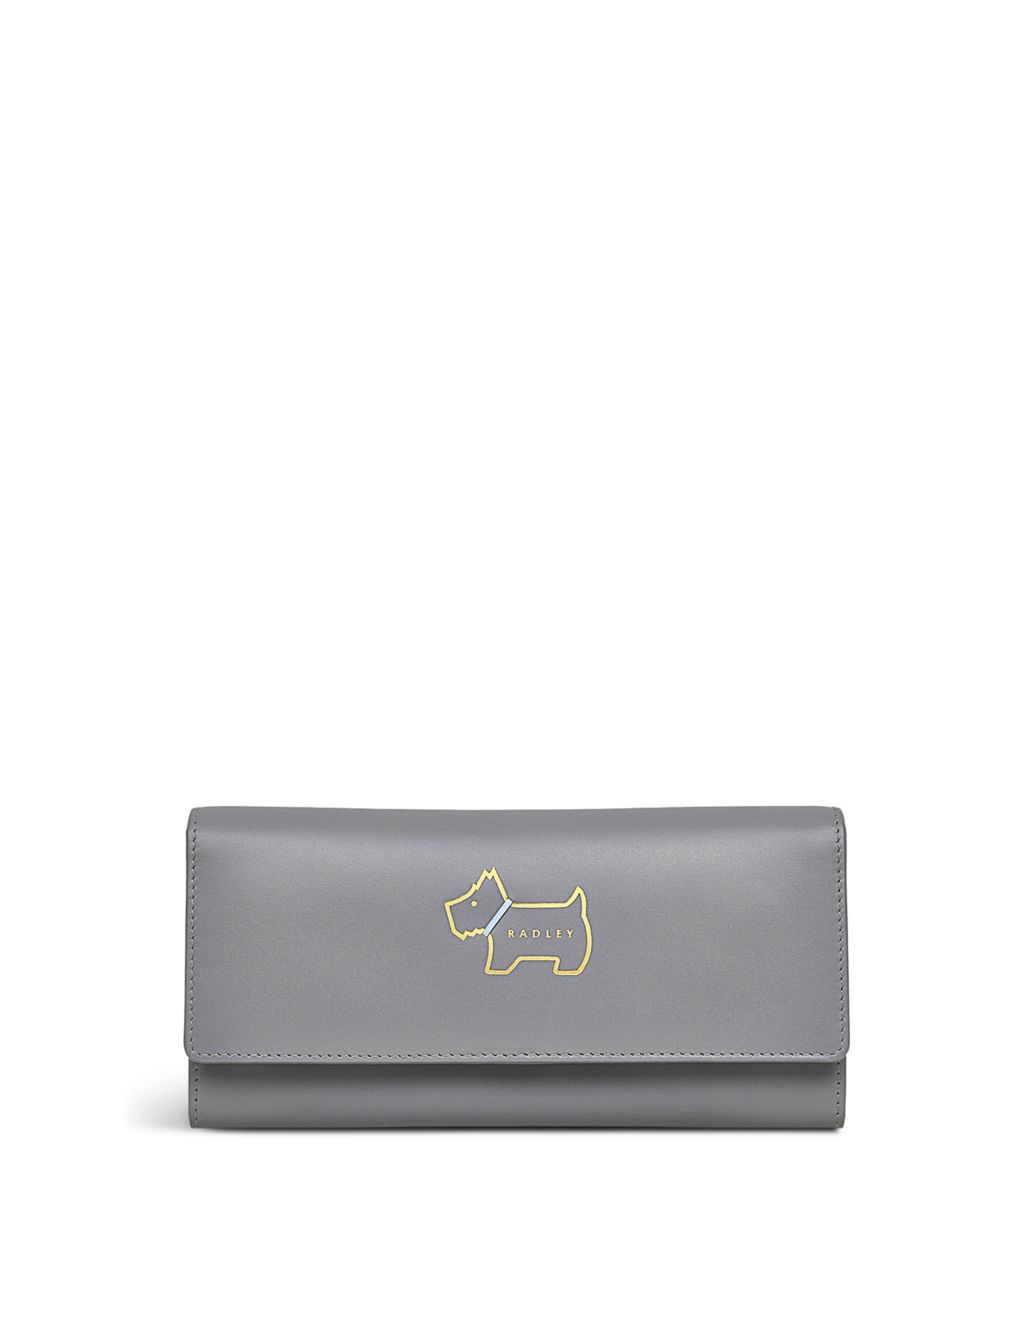 Heritage Outline Leather Foldover Purse